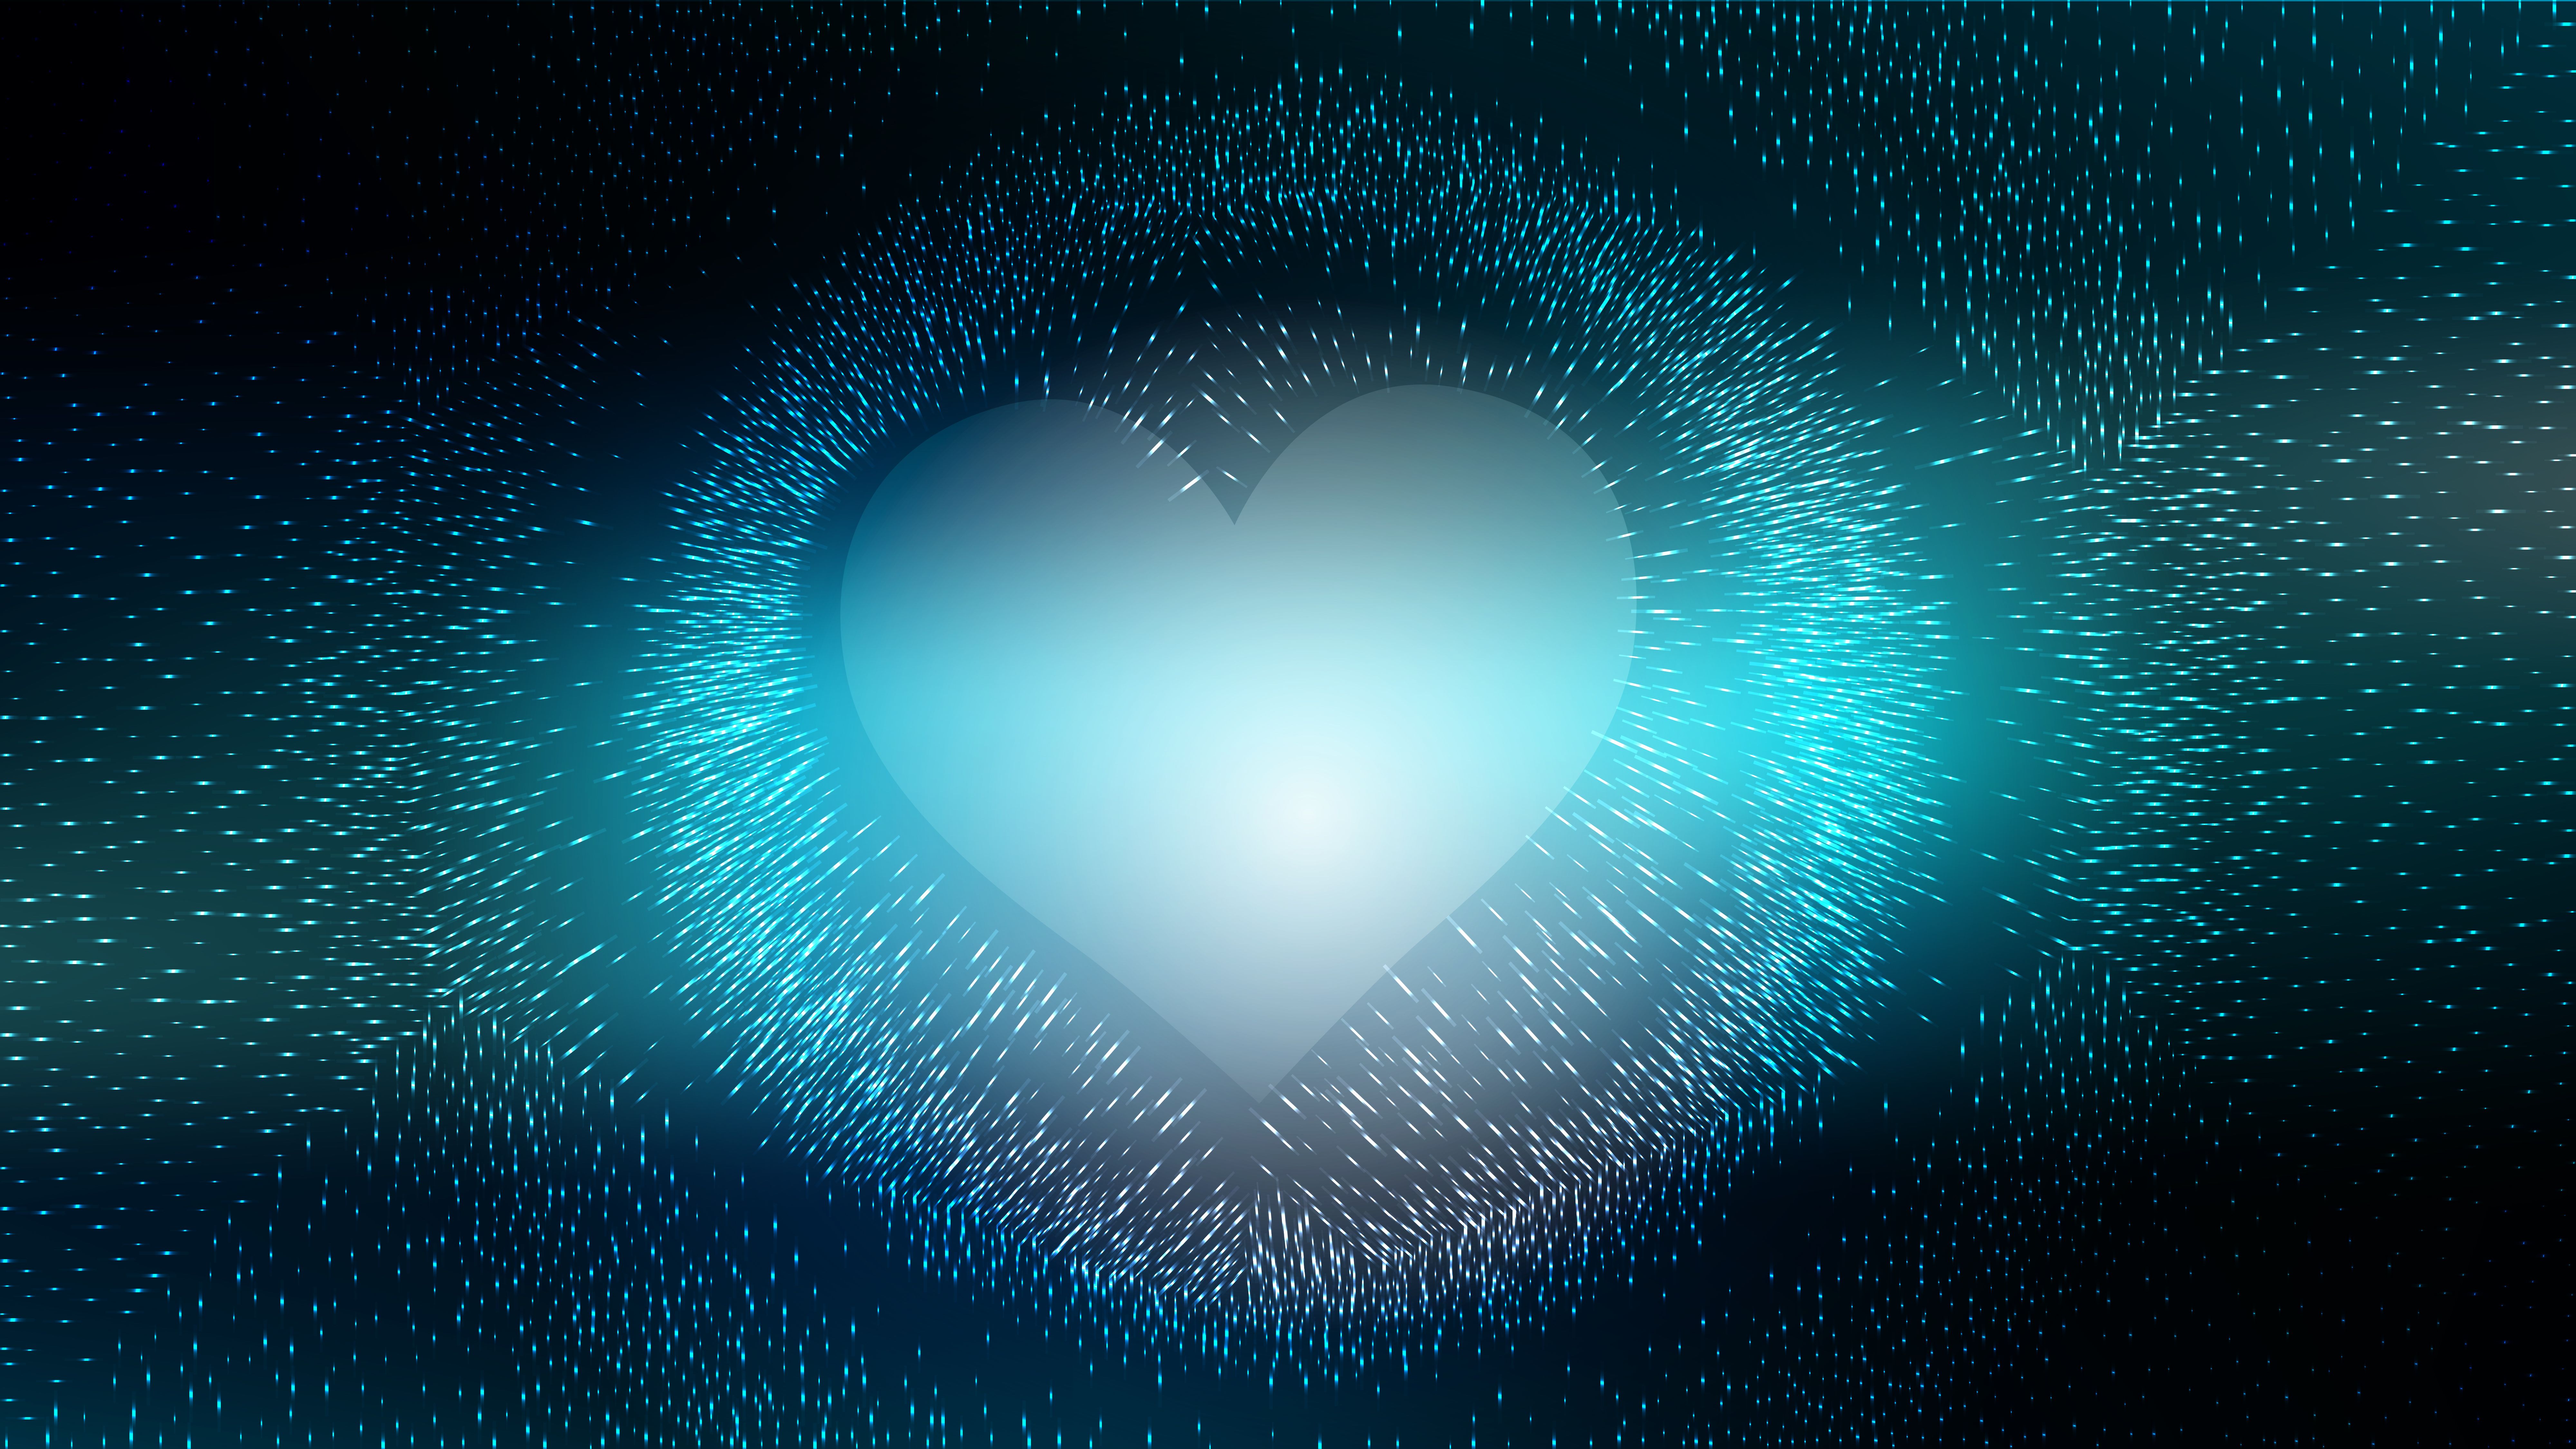 Free Black and Blue Heart Wallpaper Background Vector Illustration